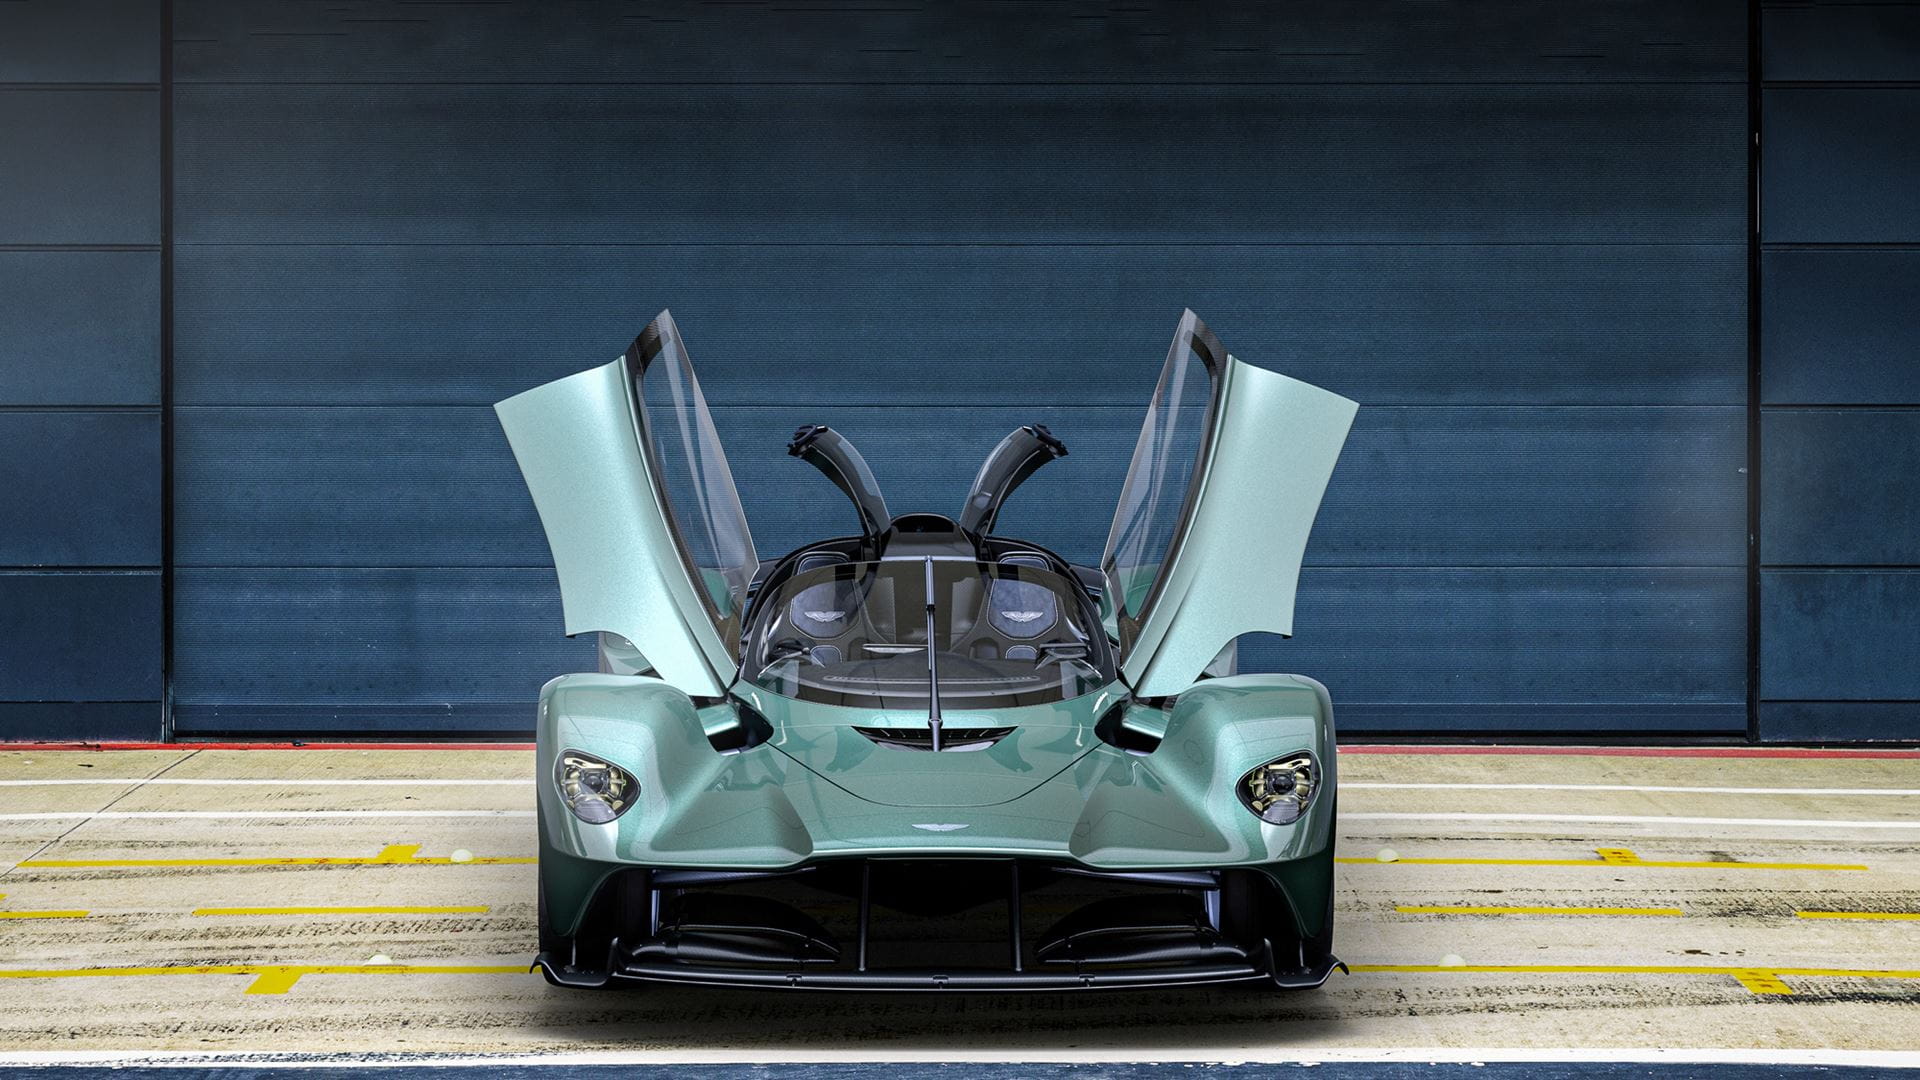 Aston Martin Valkyrie Is the Most Extreme Car to Legally Wear License Plates